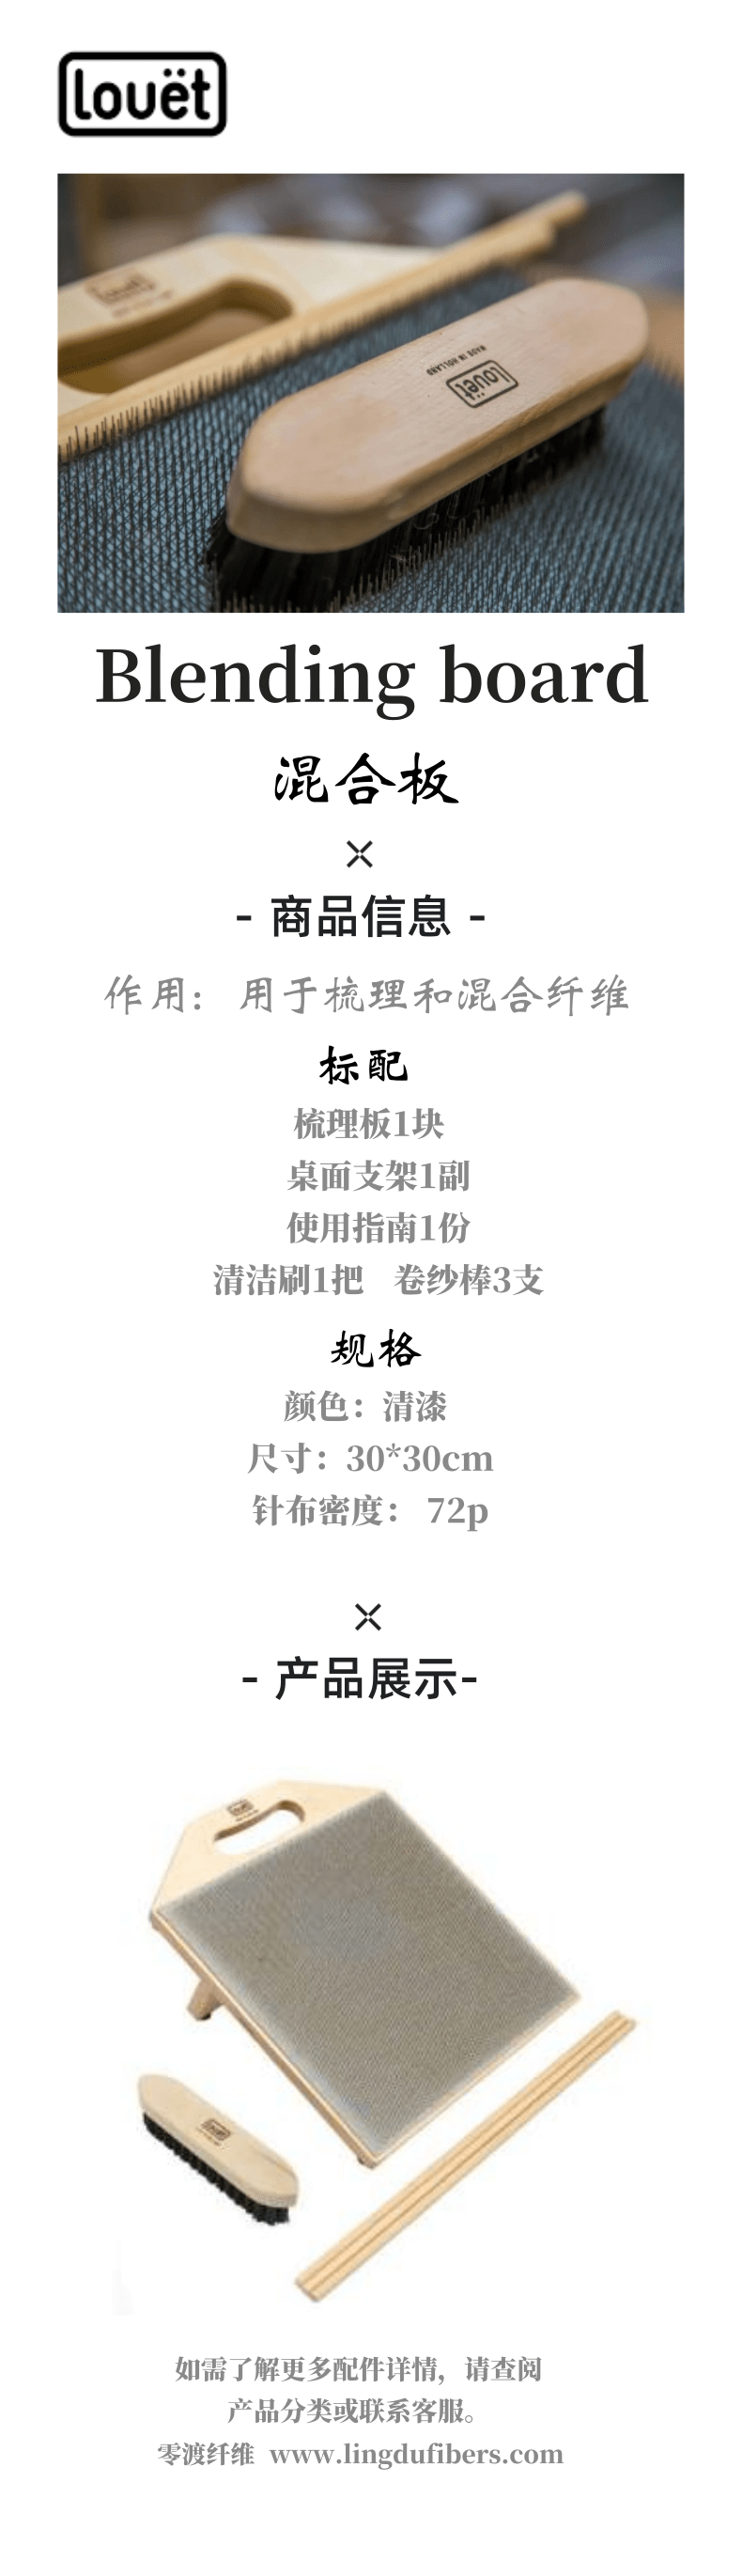 S10c 圆 单 爱.png